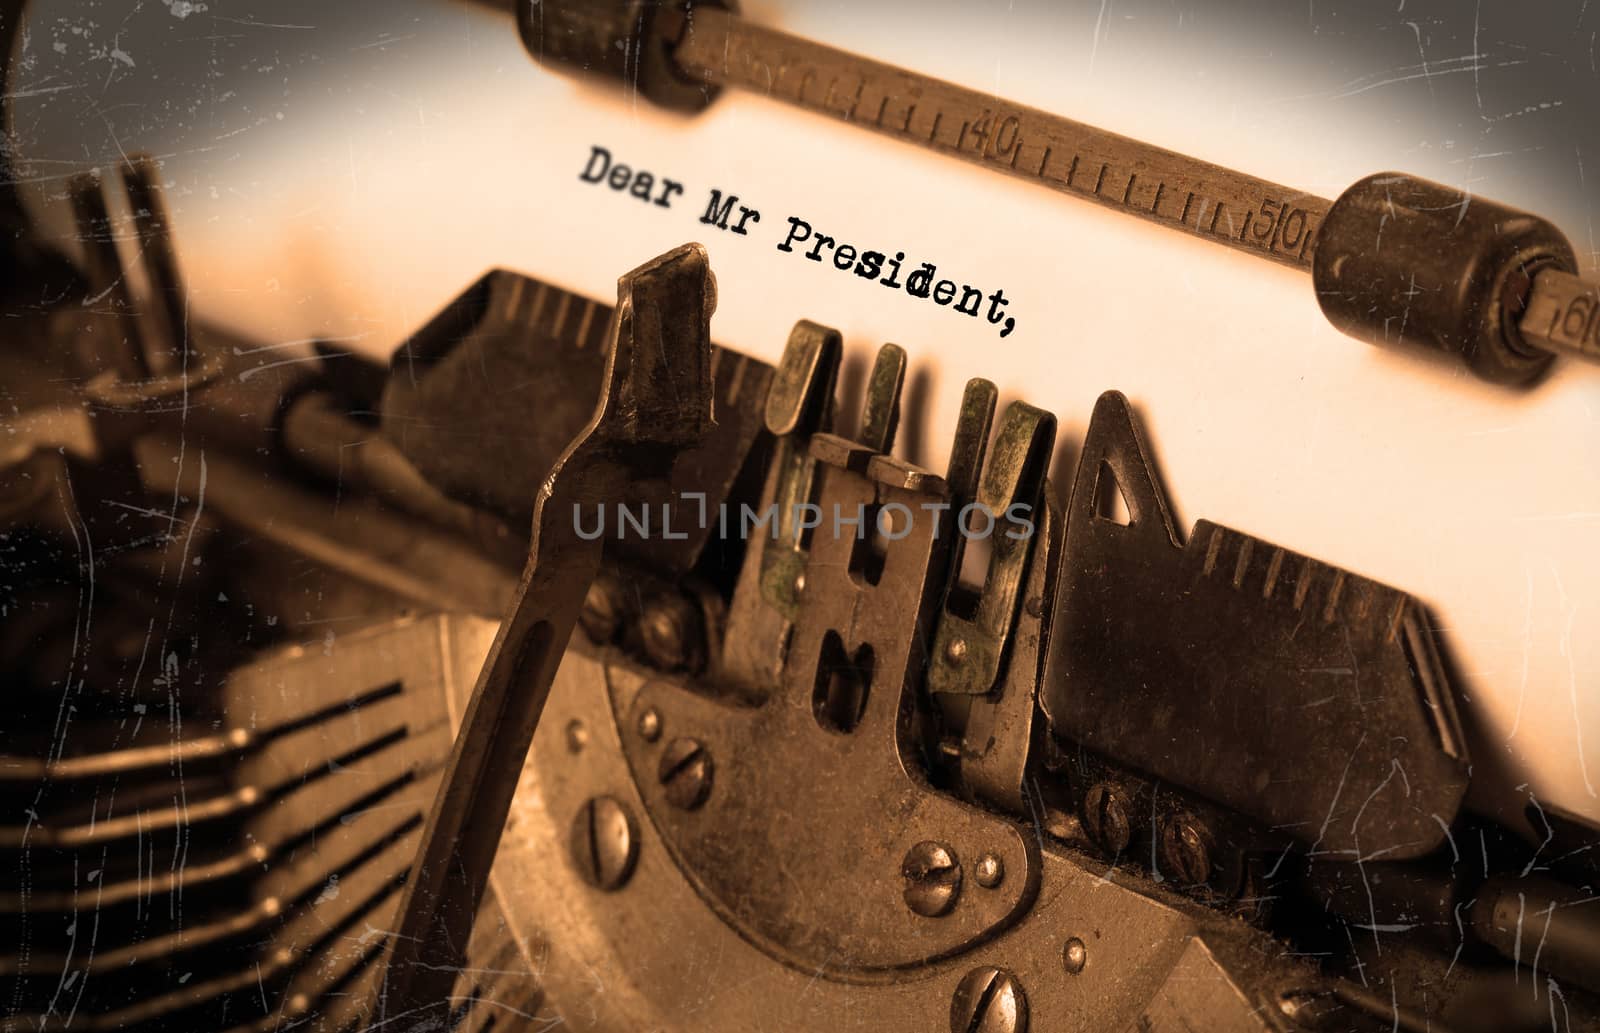 Close-up of an old typewriter with paper, perspective, selective focus, dear mr president